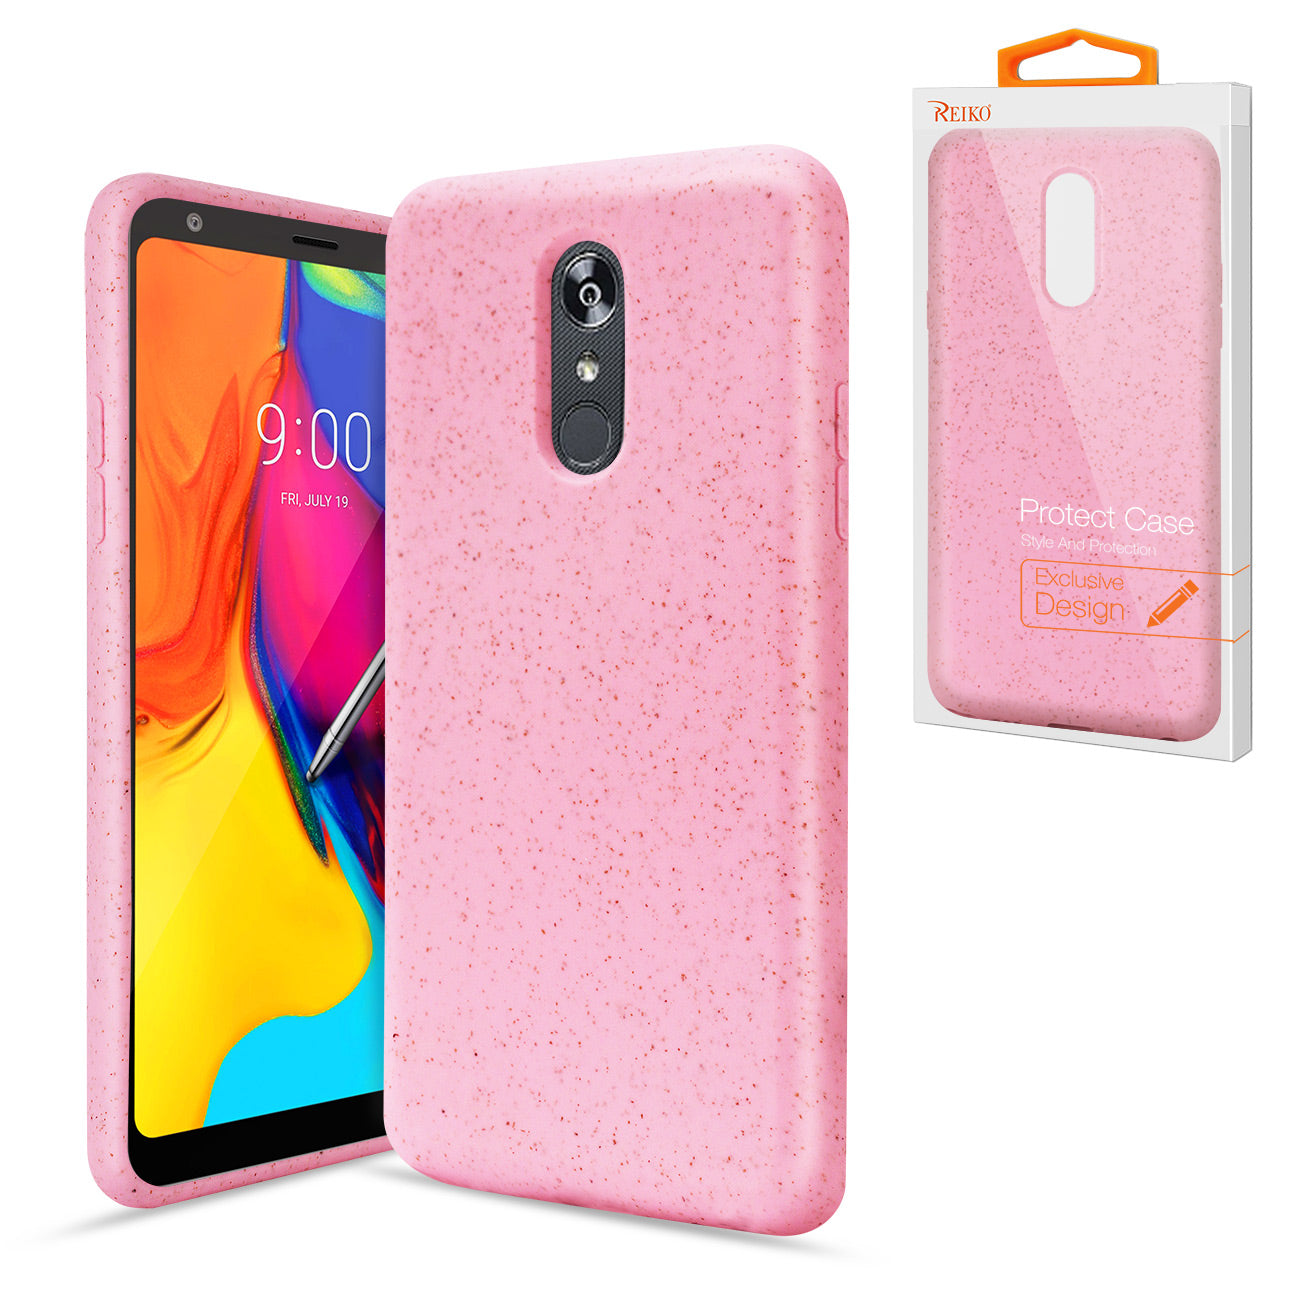 Phone Case Silicone Wheat Bran Material LG Stylo 5 Pink Color